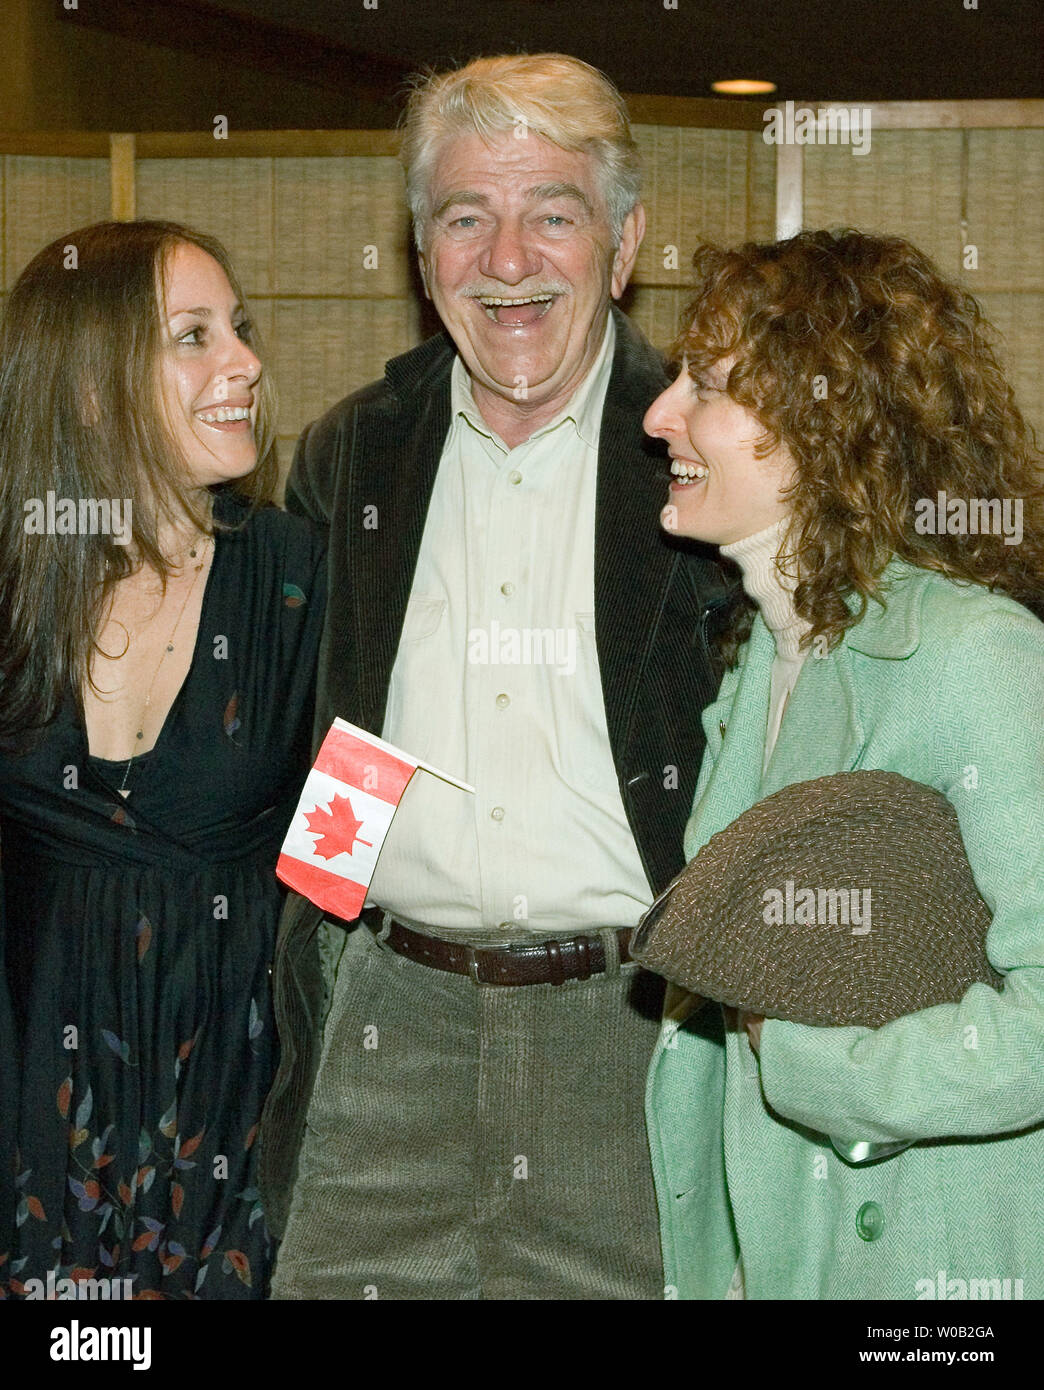 Actors Jenny Albano (L) and Seymour Cassel and director Alexandra Brodsky (R) at the anniversary gala of the Vancouver International Film Festival in Vancouver, British Columbia, October 8, 2005. Friends and co-writers, Albano and Brodsky talked Cassel into starring in their John Cassavetes influenced film 'Bittersweet Place' (USA) which is screening at the festival.  (UPI Photo/Heinz Ruckemann) Stock Photo